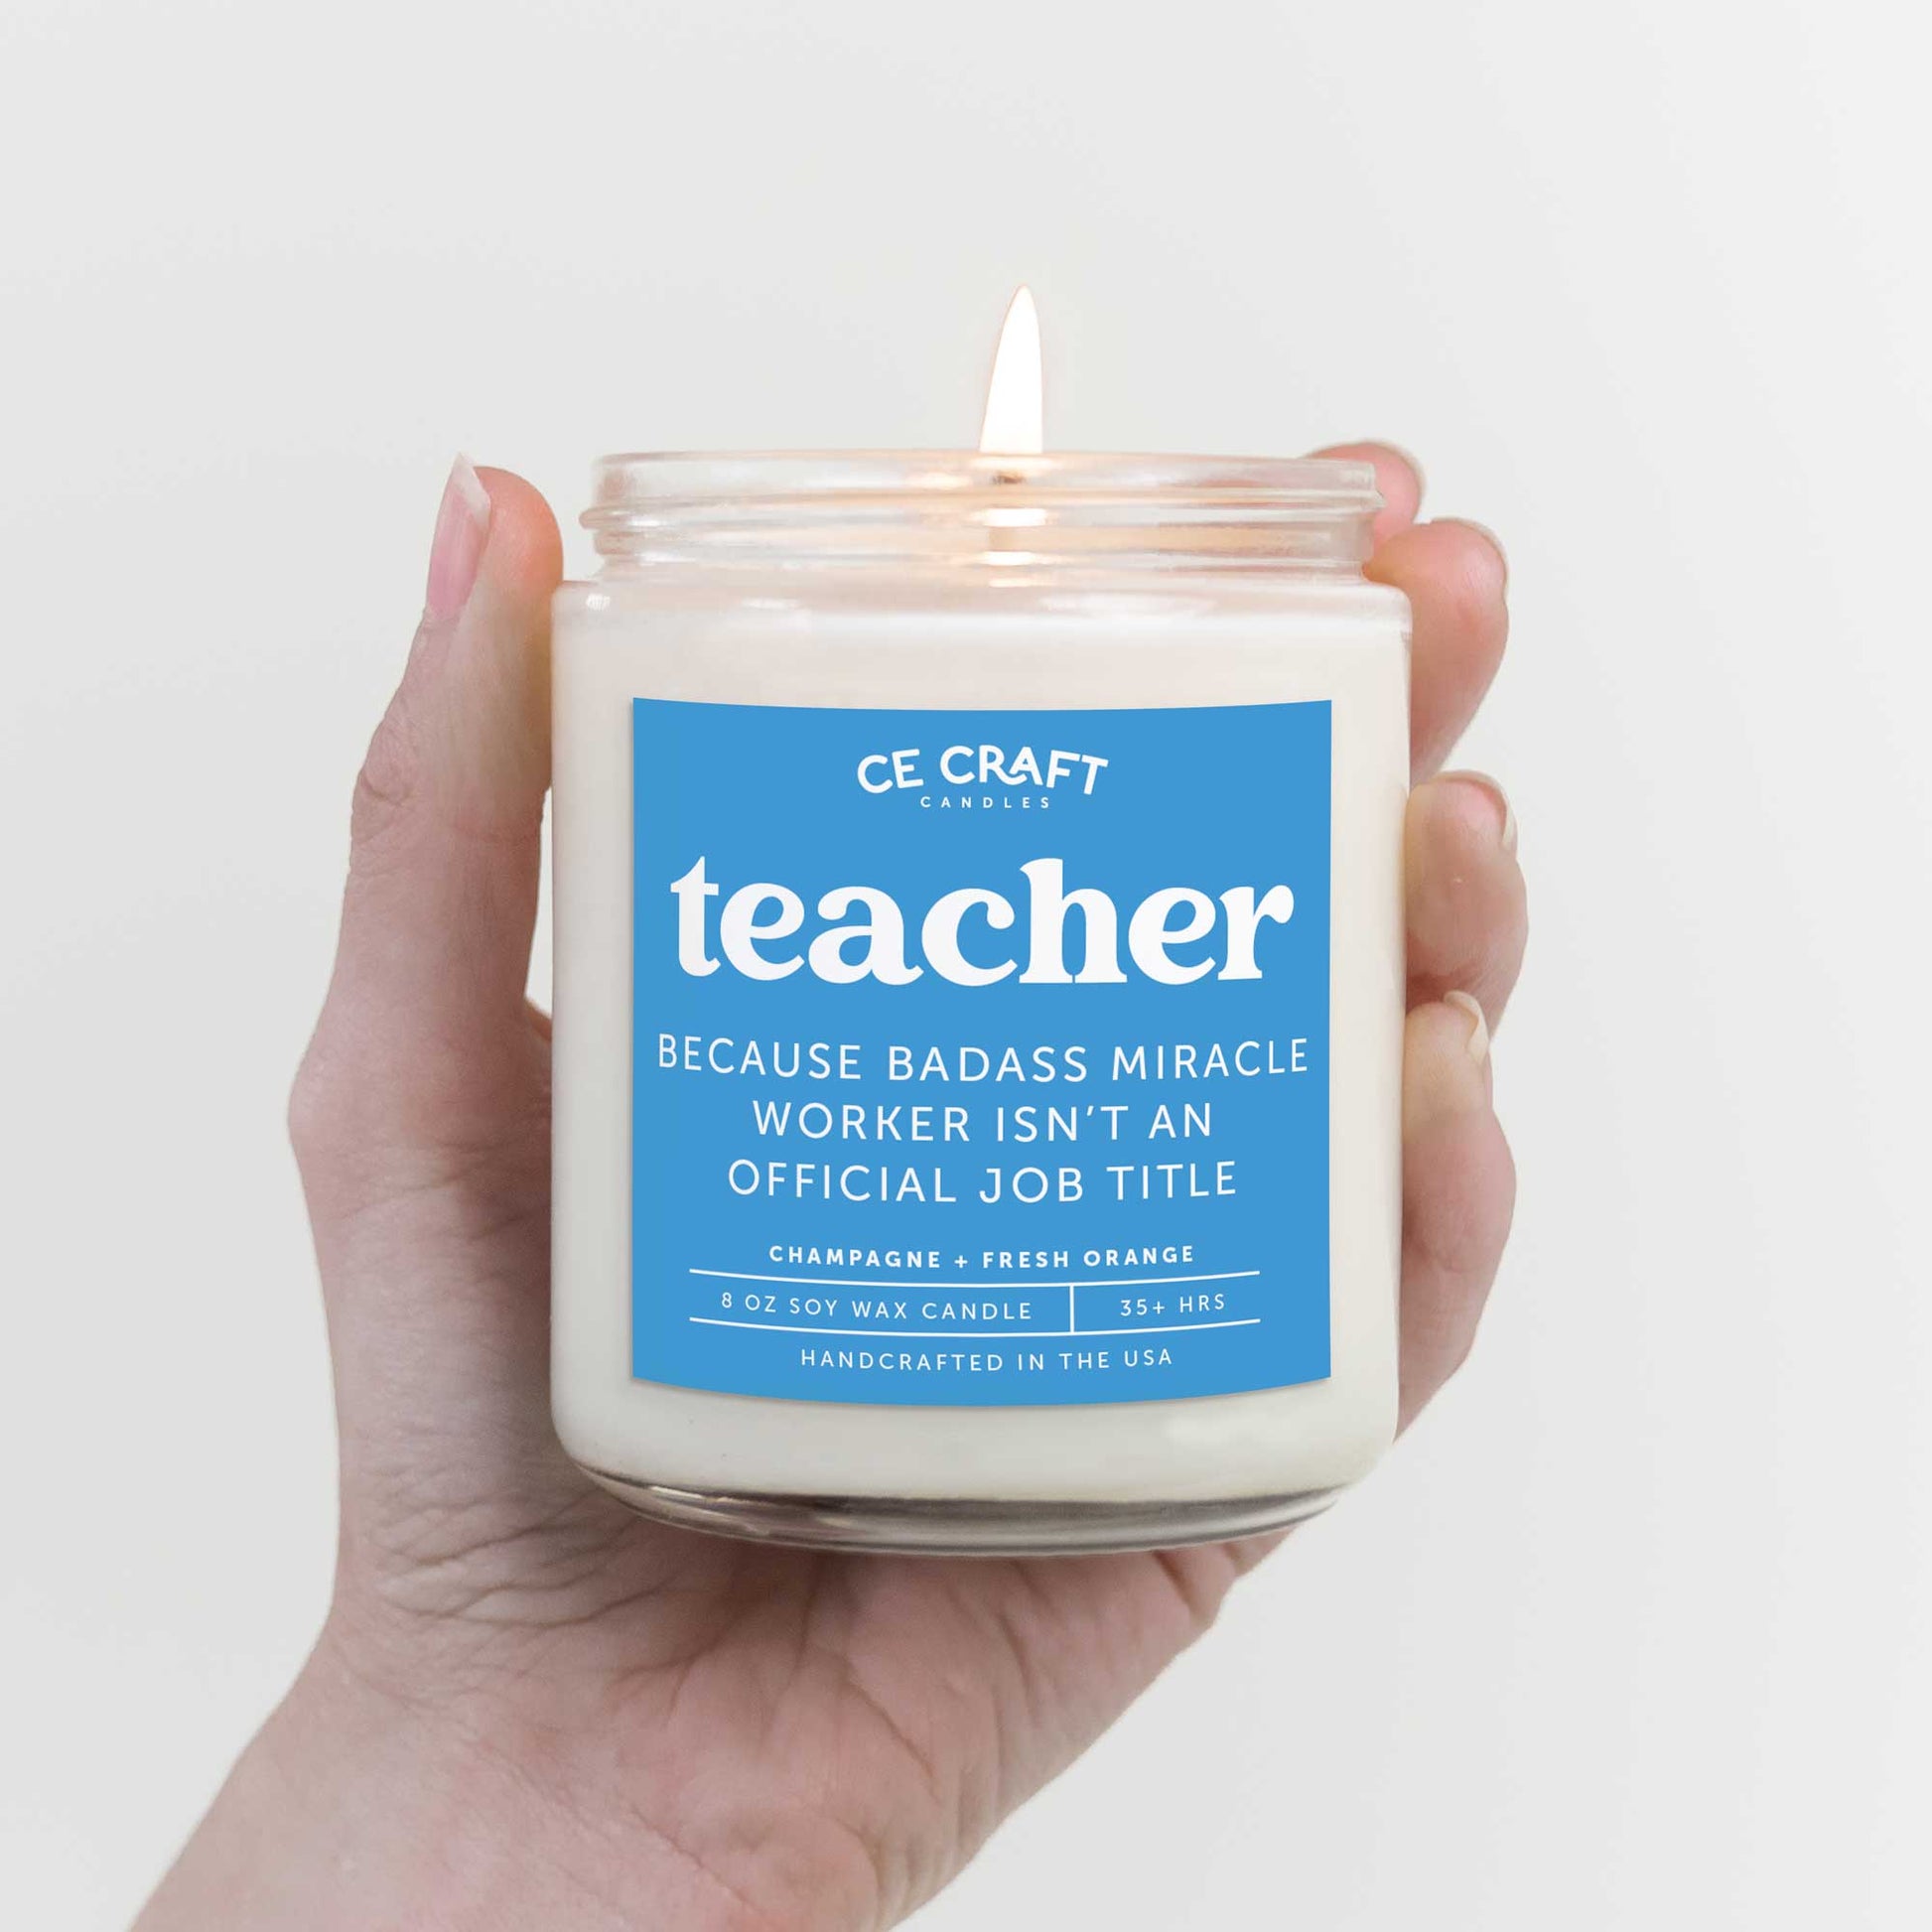 Teacher Because Badass Miracle Worker Isn't an Official Title Candle Candle CE Craft 